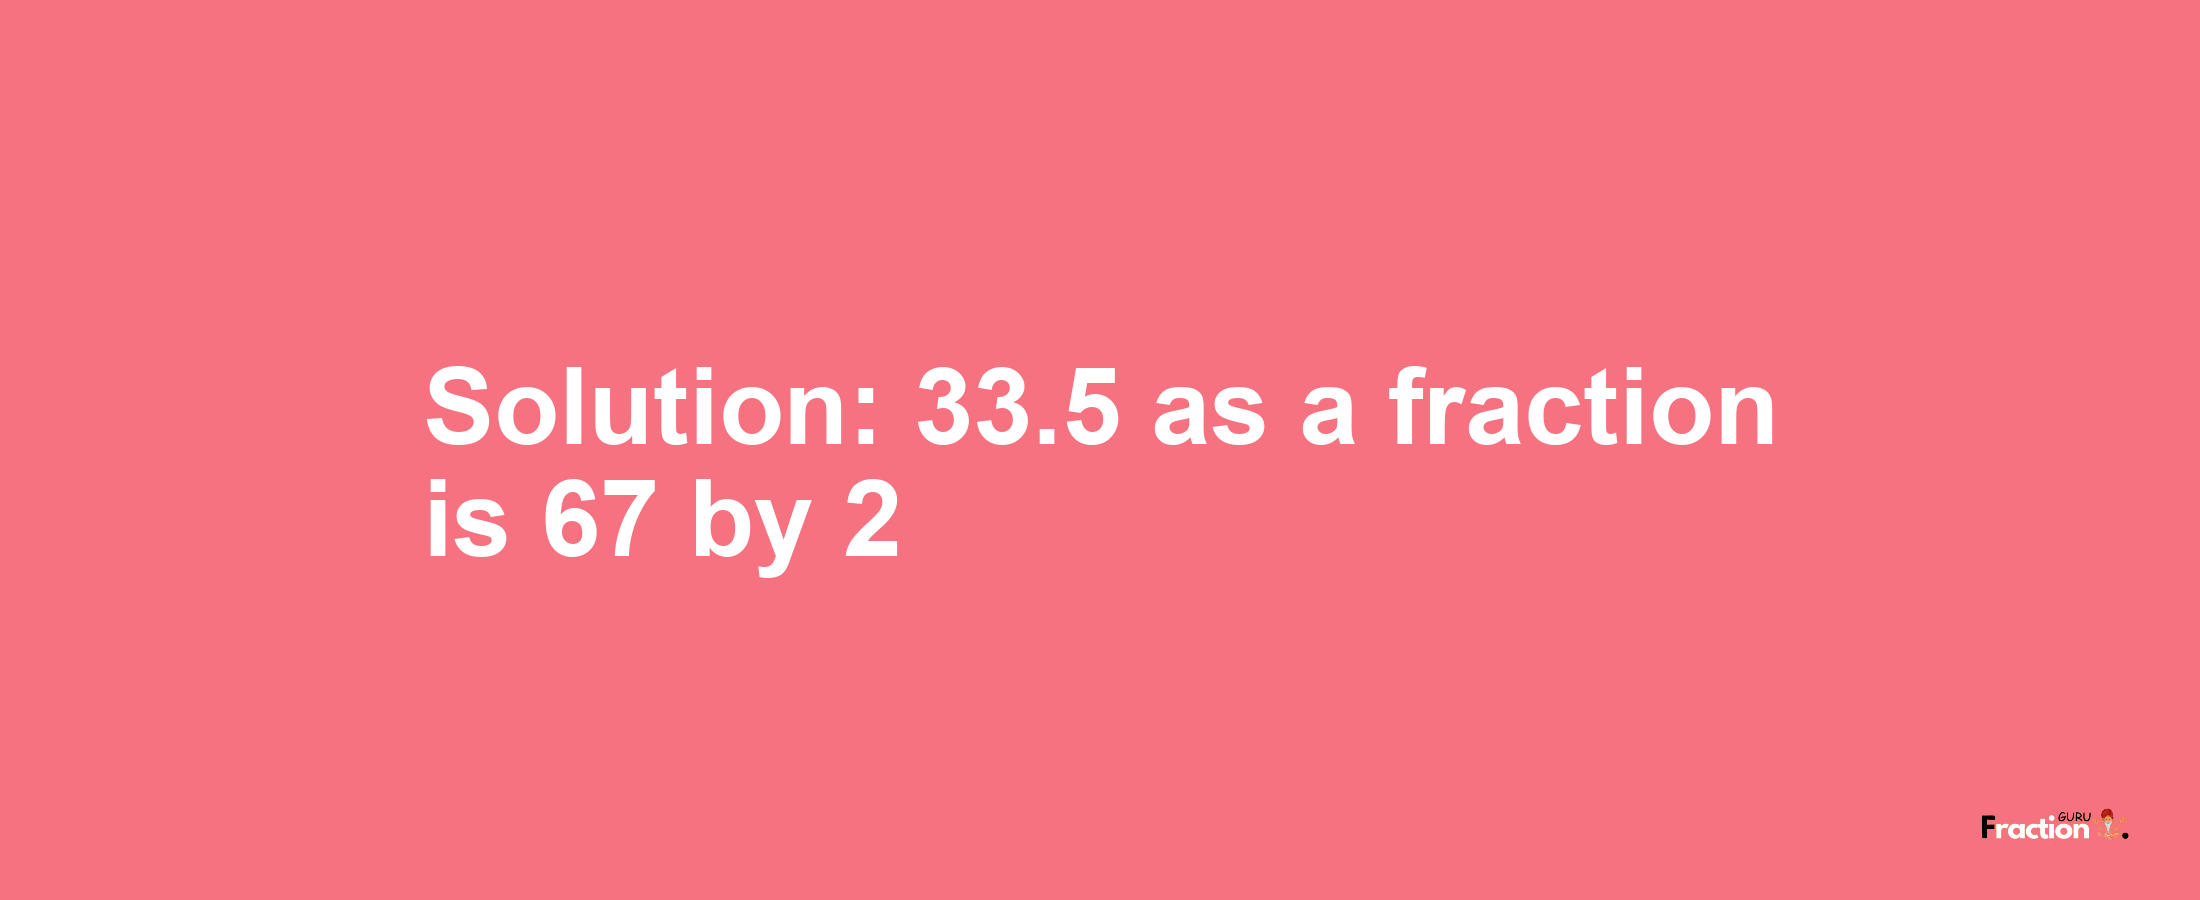 Solution:33.5 as a fraction is 67/2